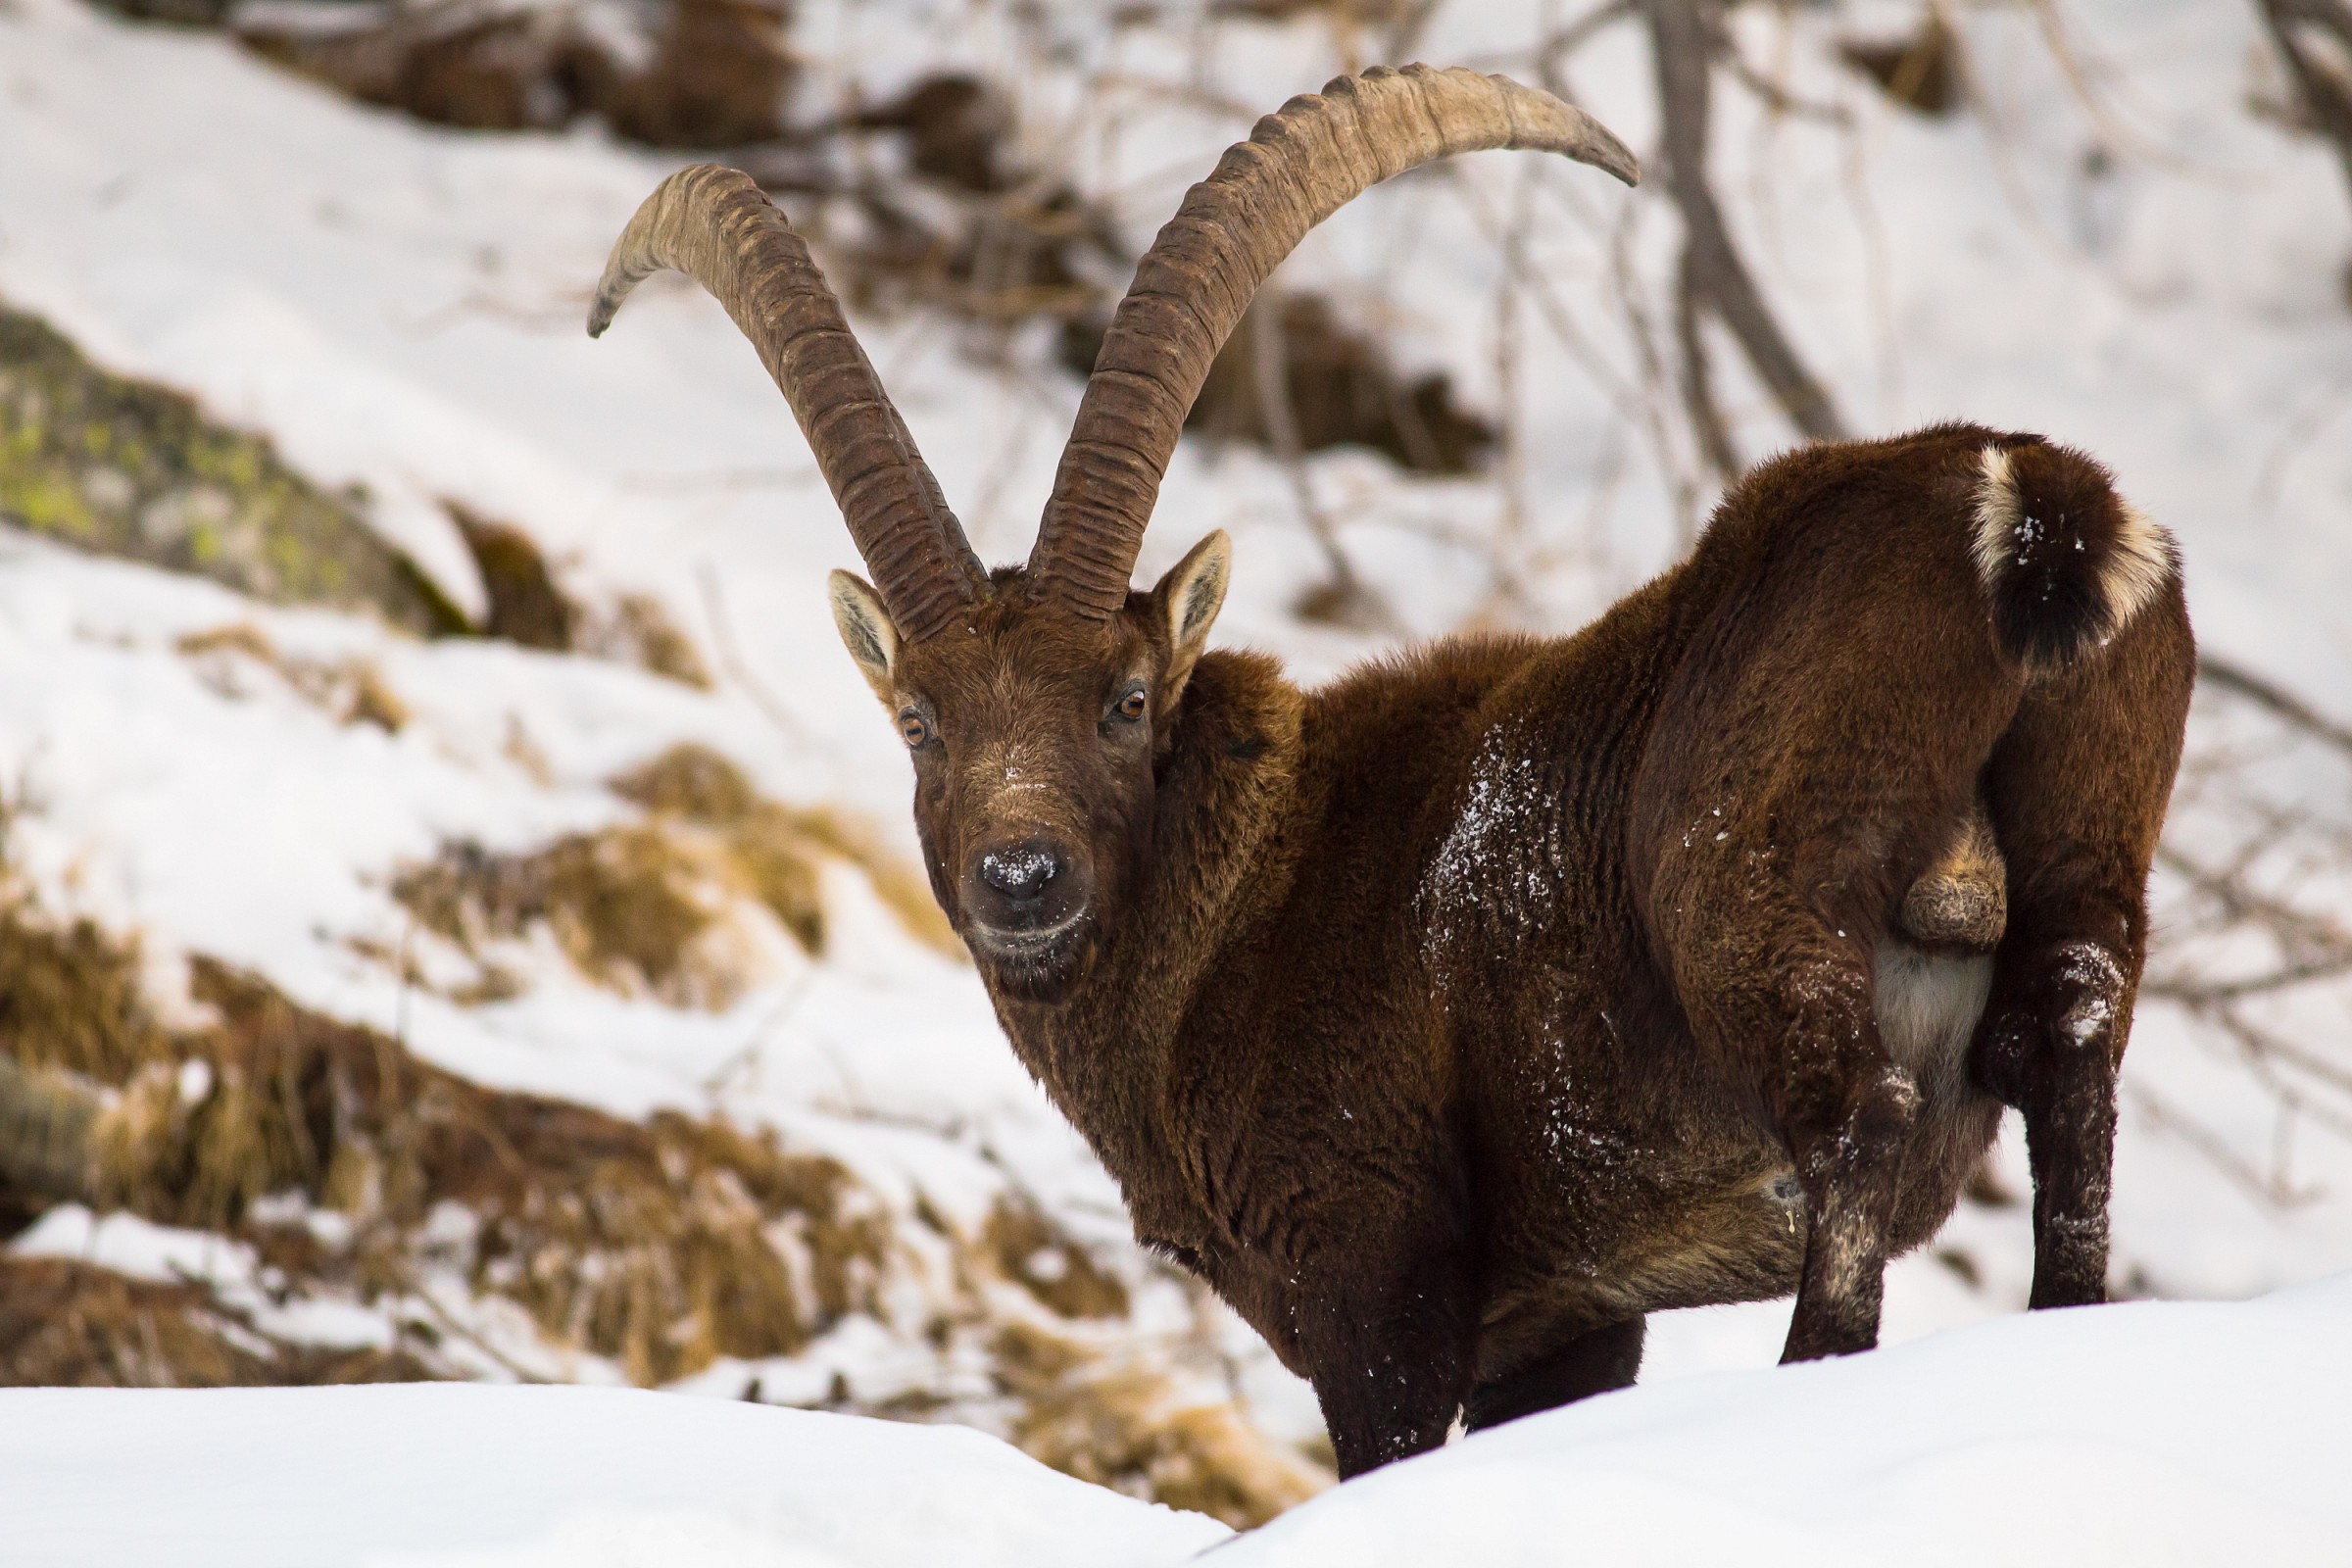 The ibex has noticed us...